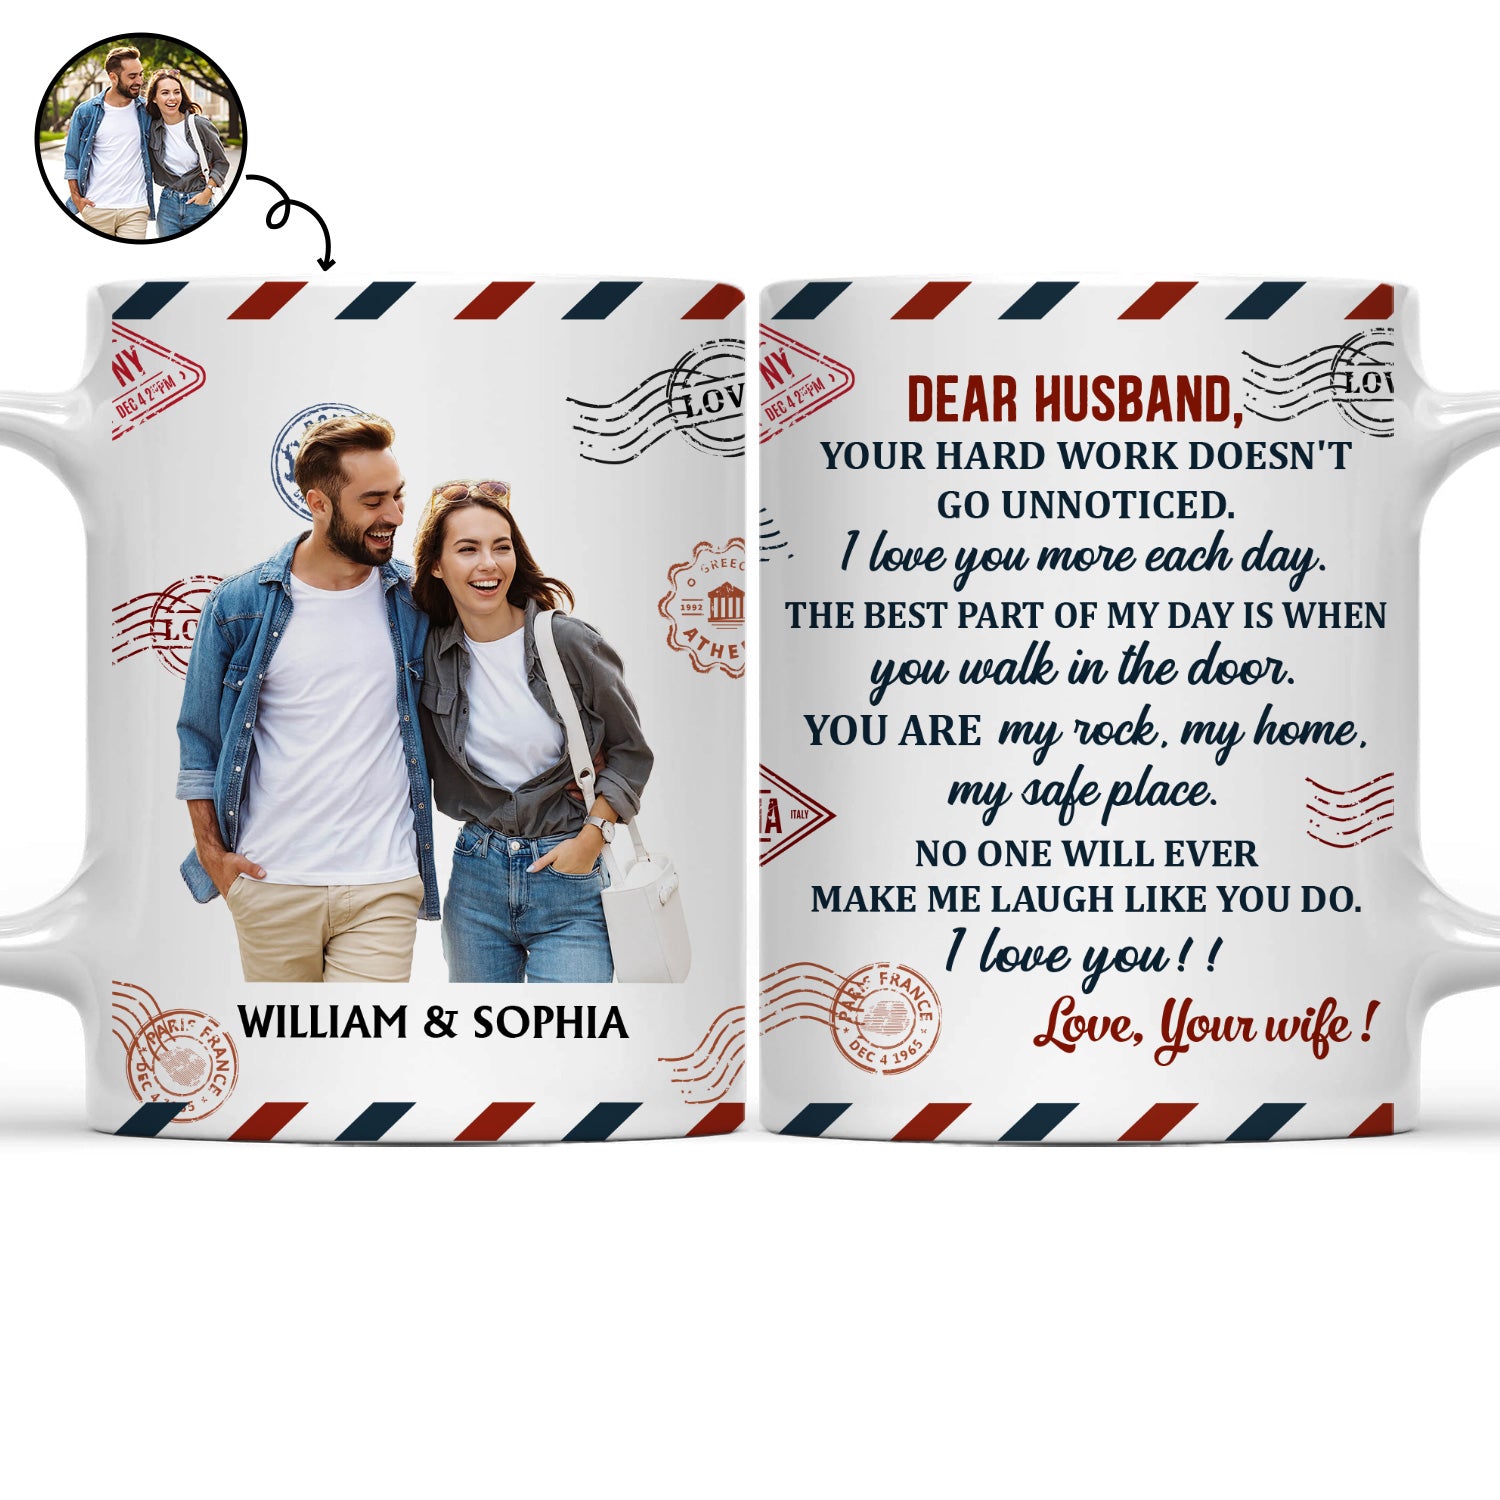 Custom Photo Your Hard Work Doesn't Go Unnoticed - Birthday, Anniversary Gift For Spouse, Husband, Wife, Couple - Personalized White Edge-to-Edge Mug